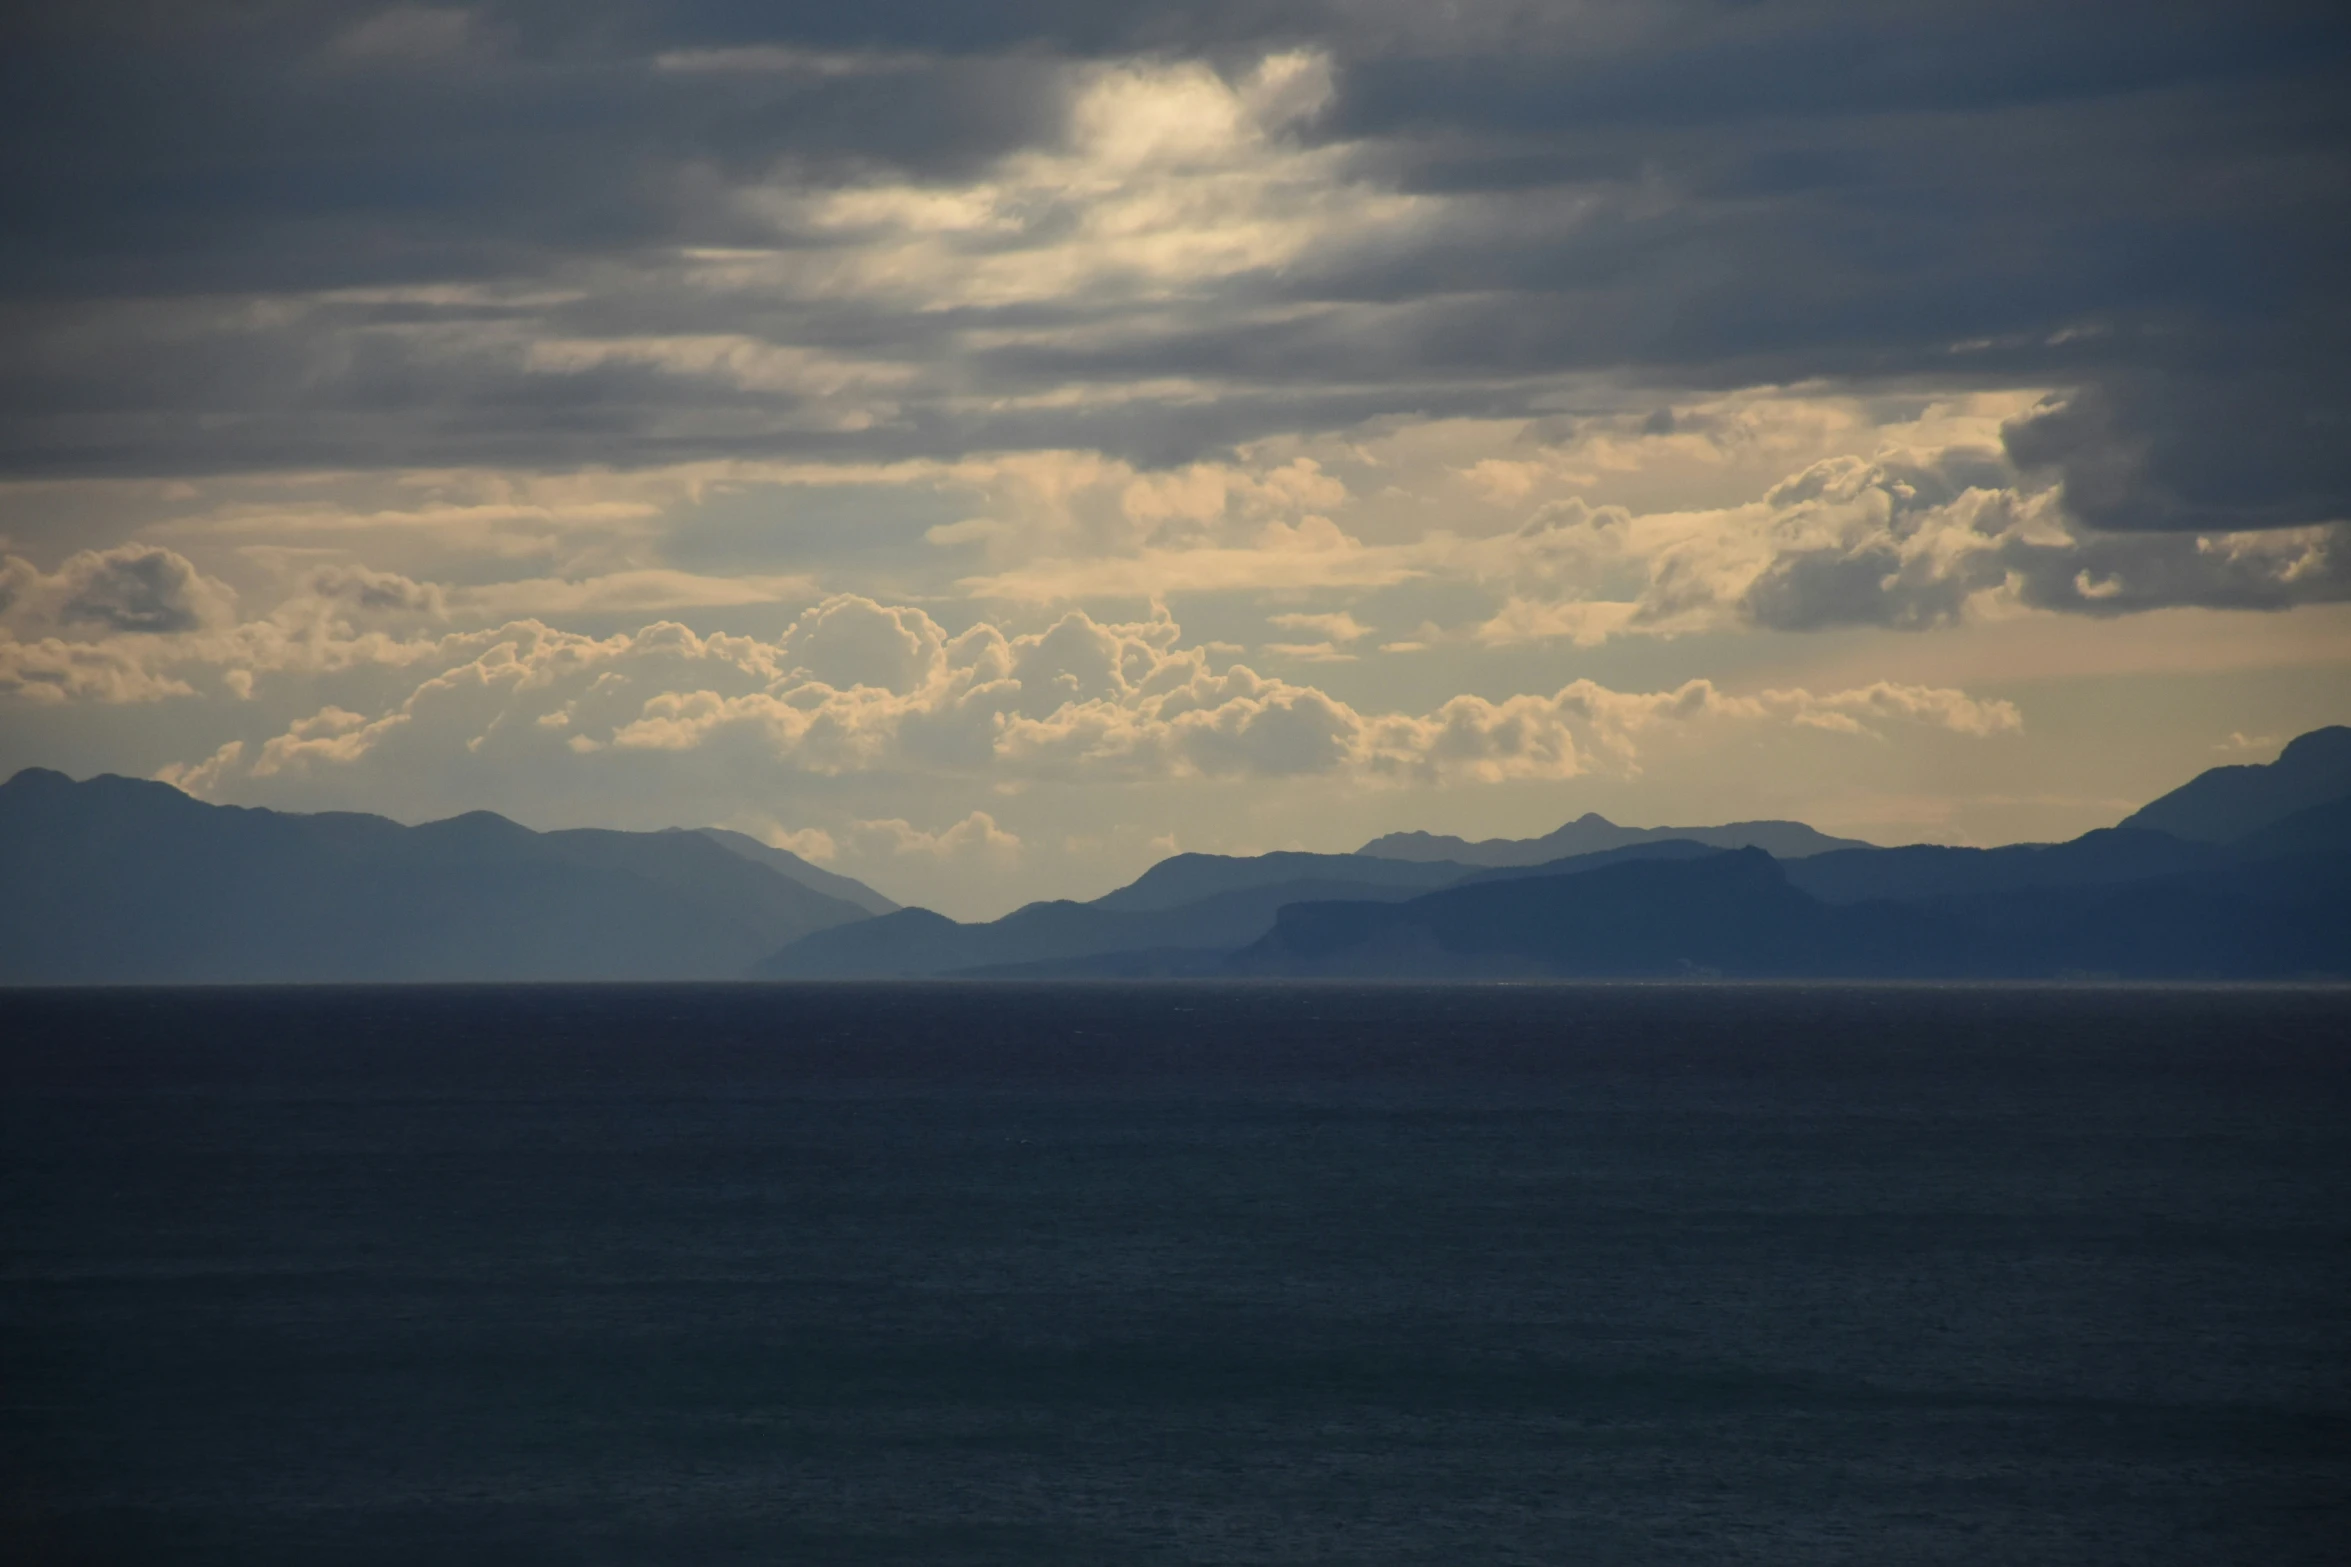 some mountains and the ocean under some cloudy skies